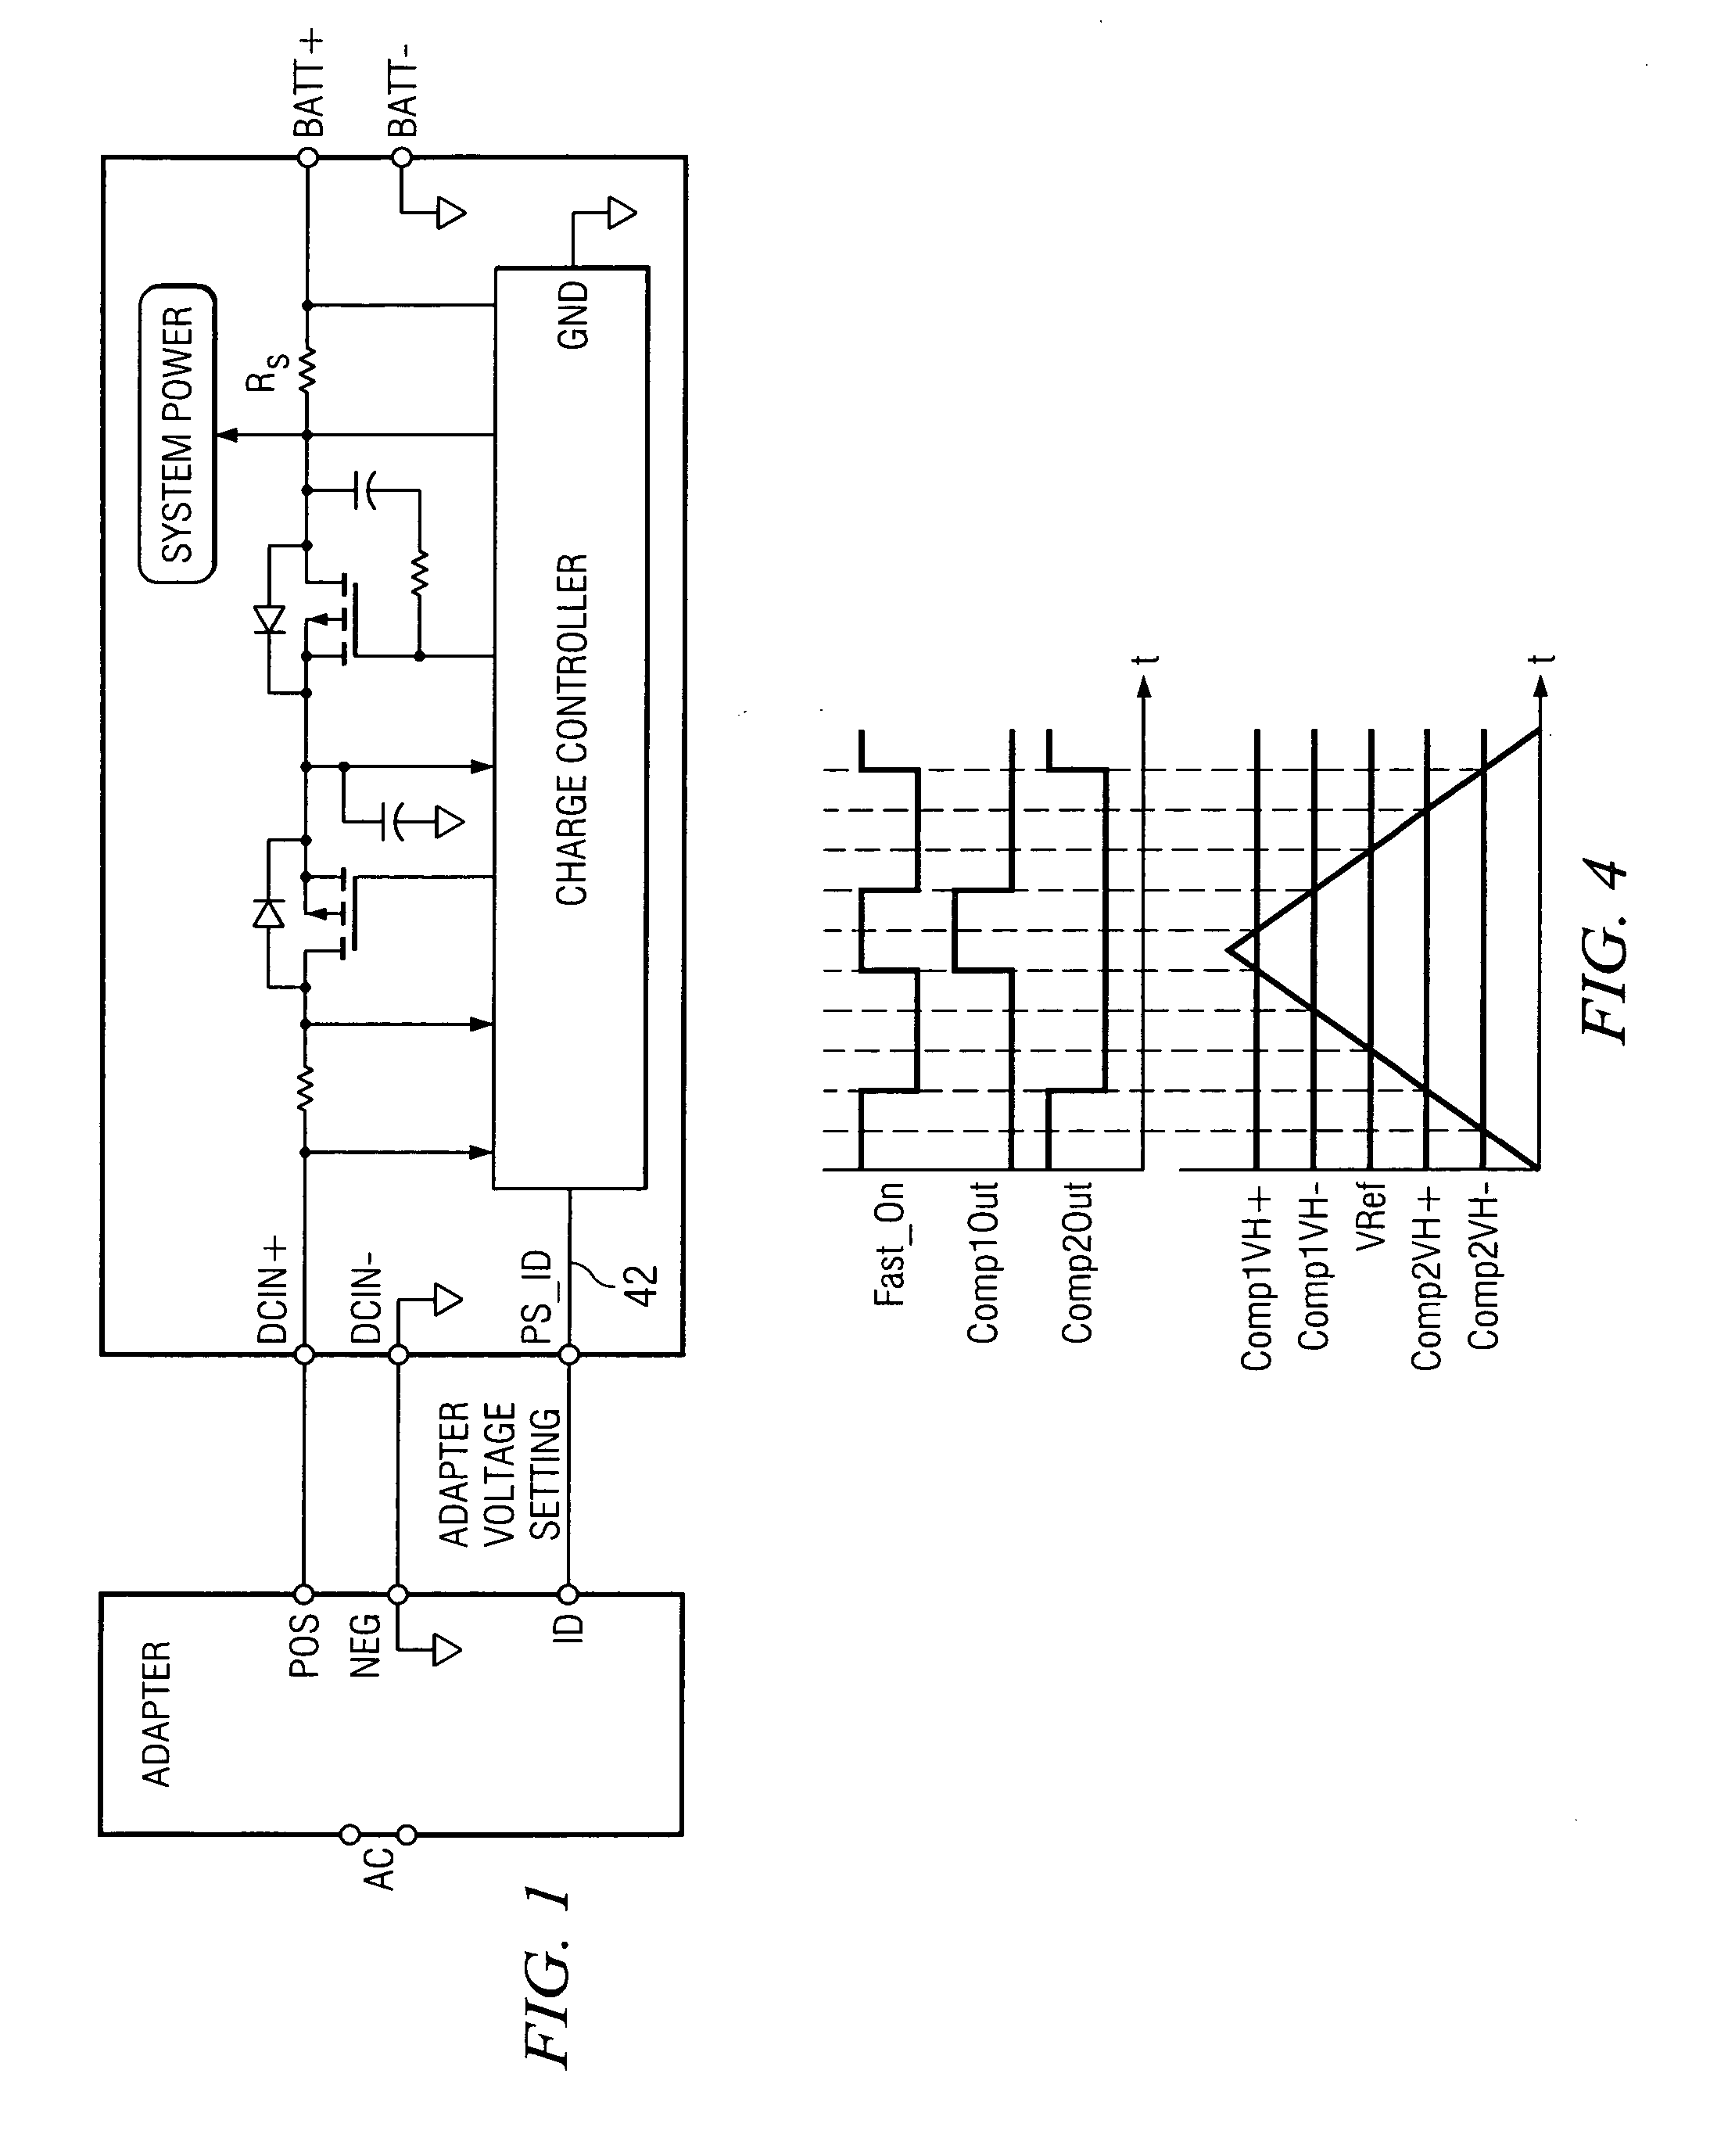 Feed-forward circuit for adjustable output voltage controller circuits